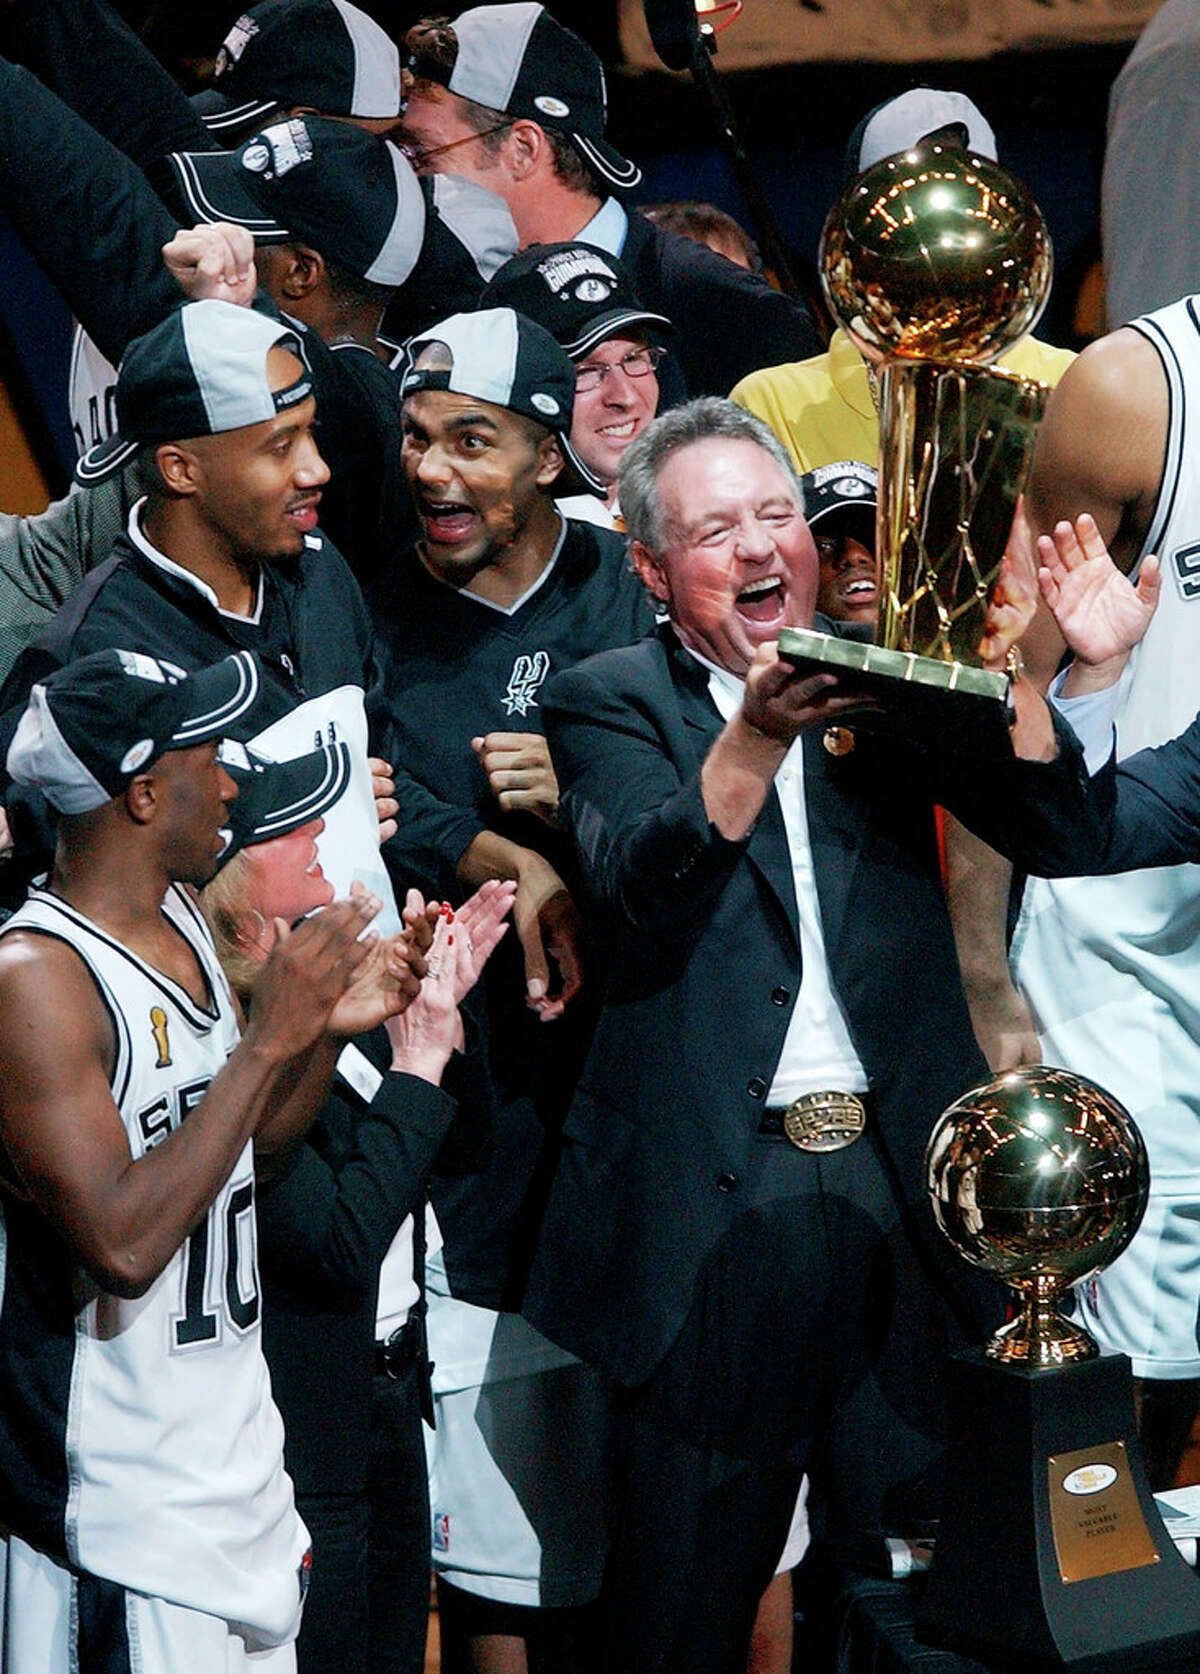 San Antonio Spurs Championship 02-03 Team: Where Are They Now?